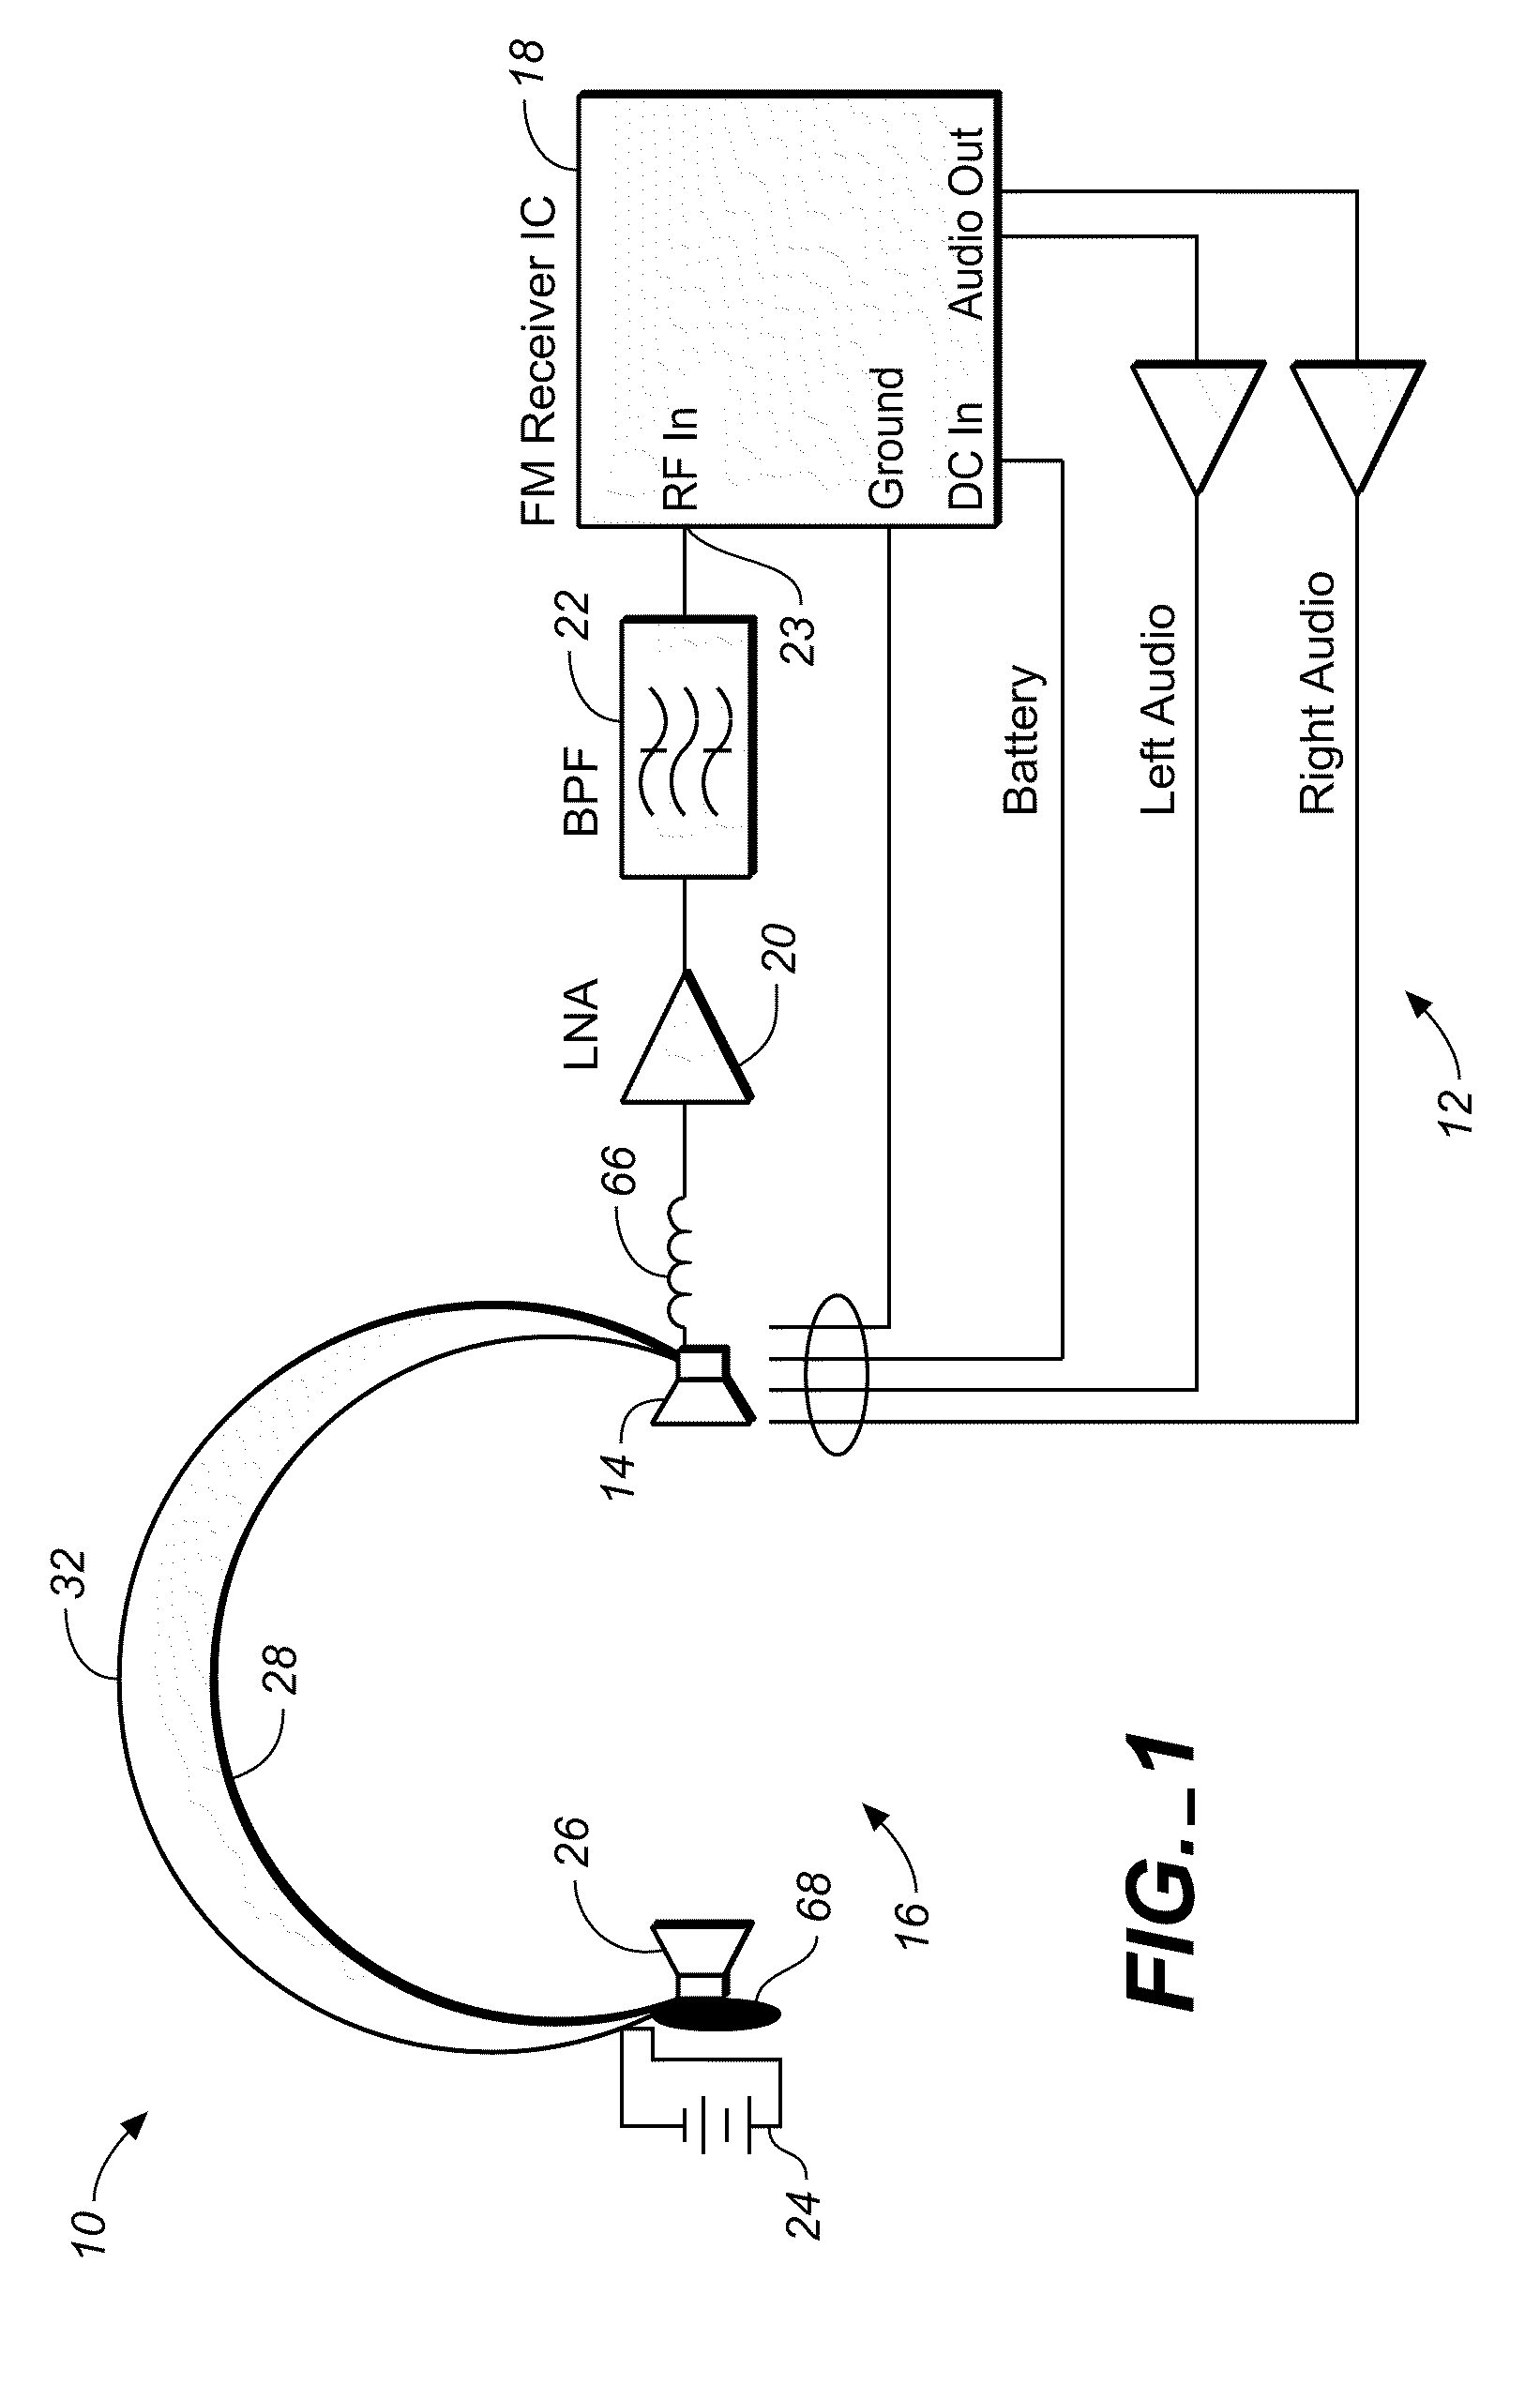 Headphone receiver apparatus for use with low power transmitters